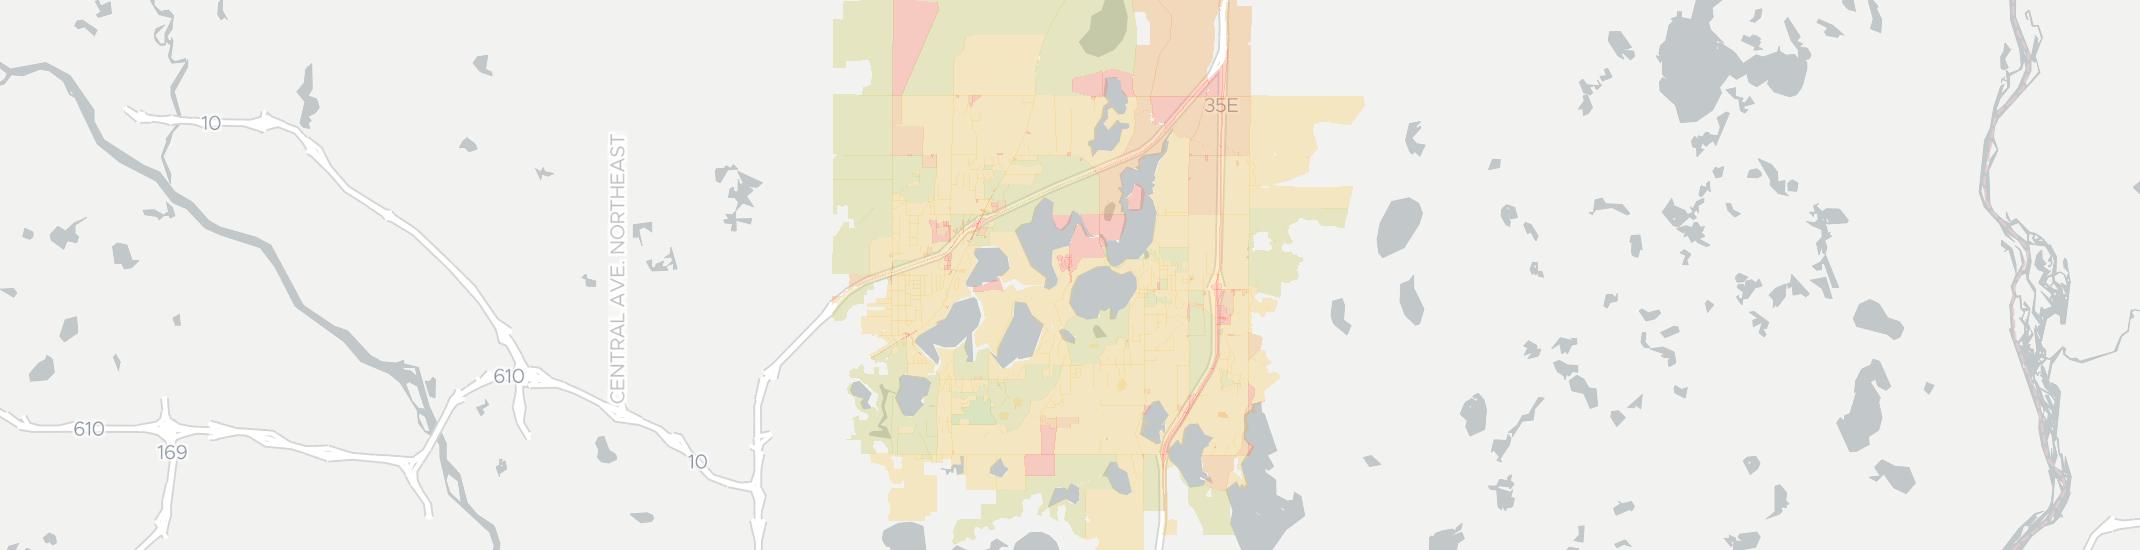 Lino Lakes Internet Competition Map. Click for interactive map.